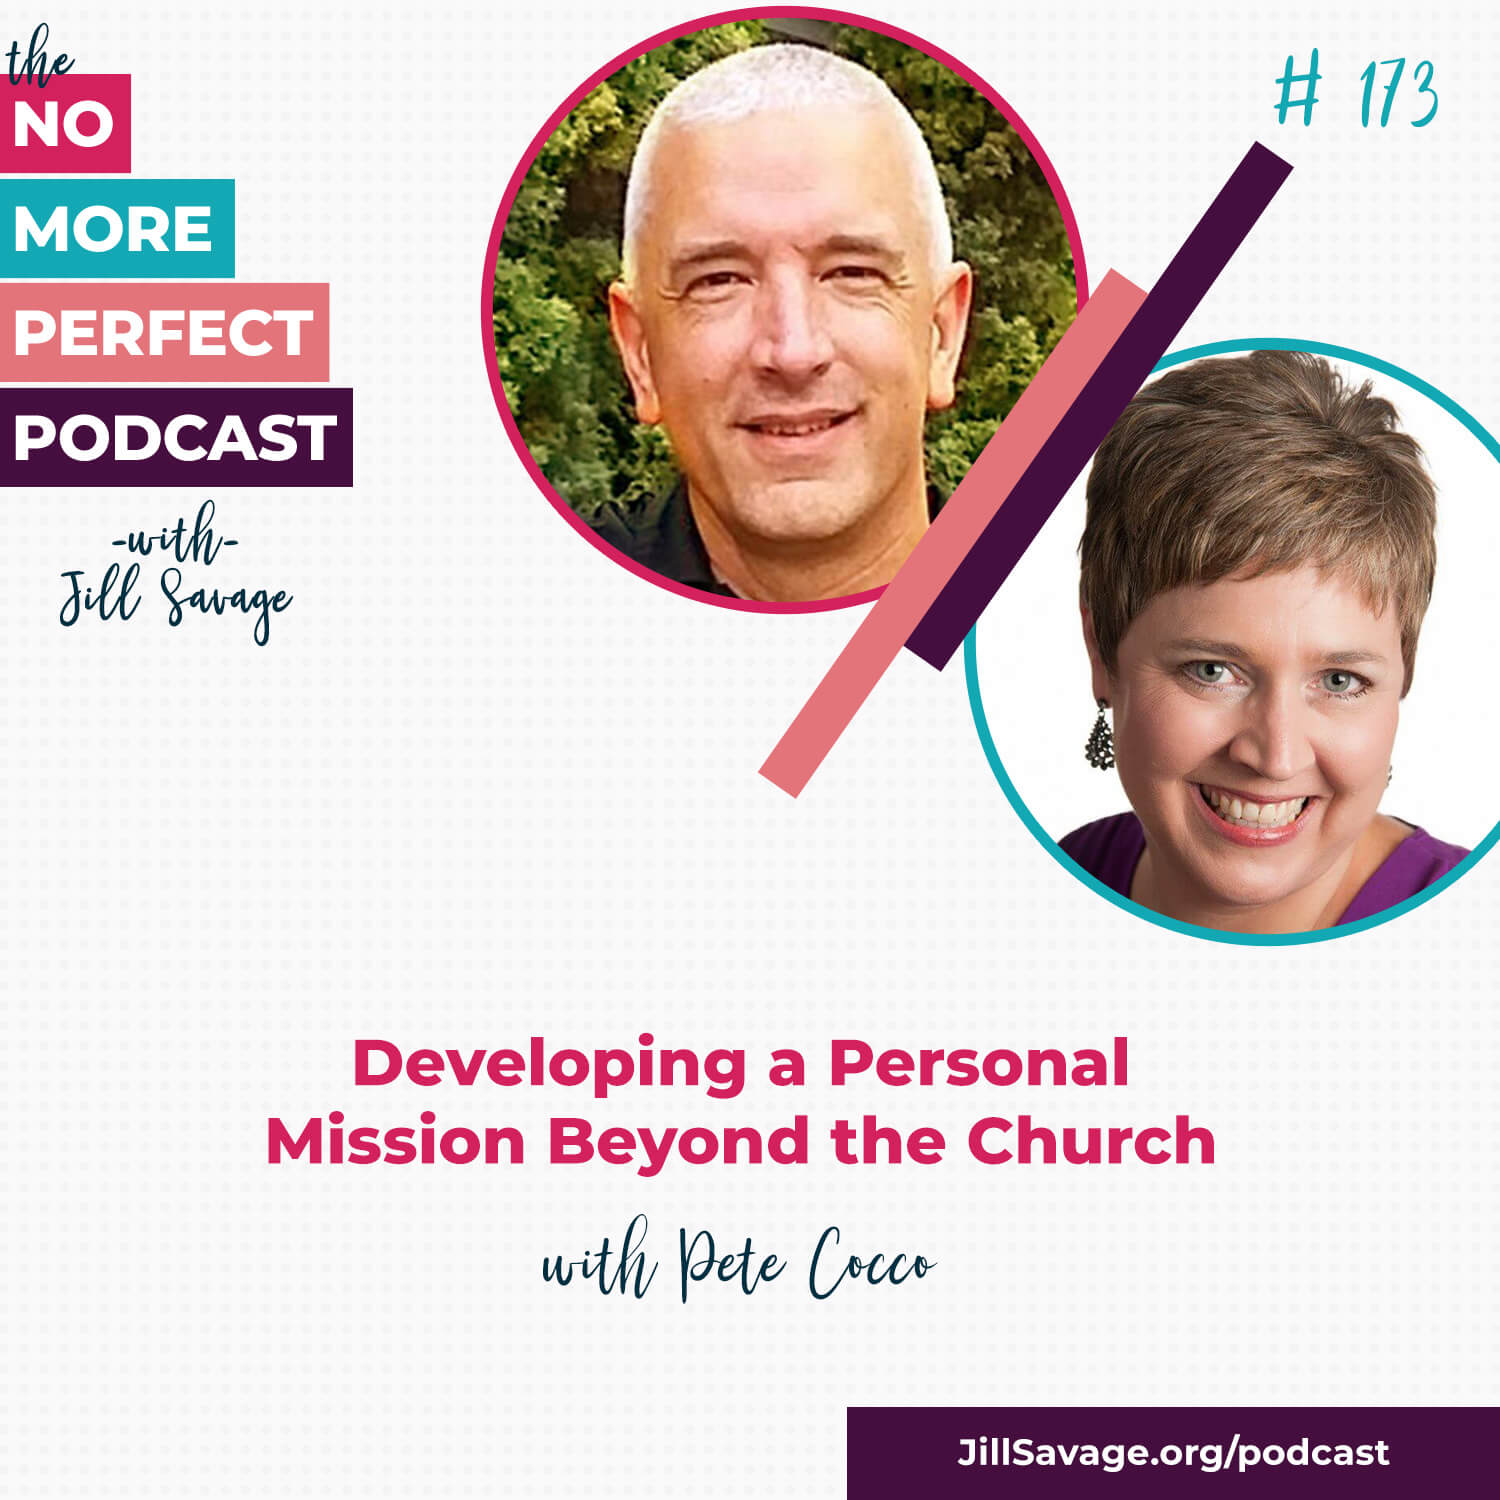 Developing a Personal Mission Beyond the Church with Pete Cocco | Episode 173